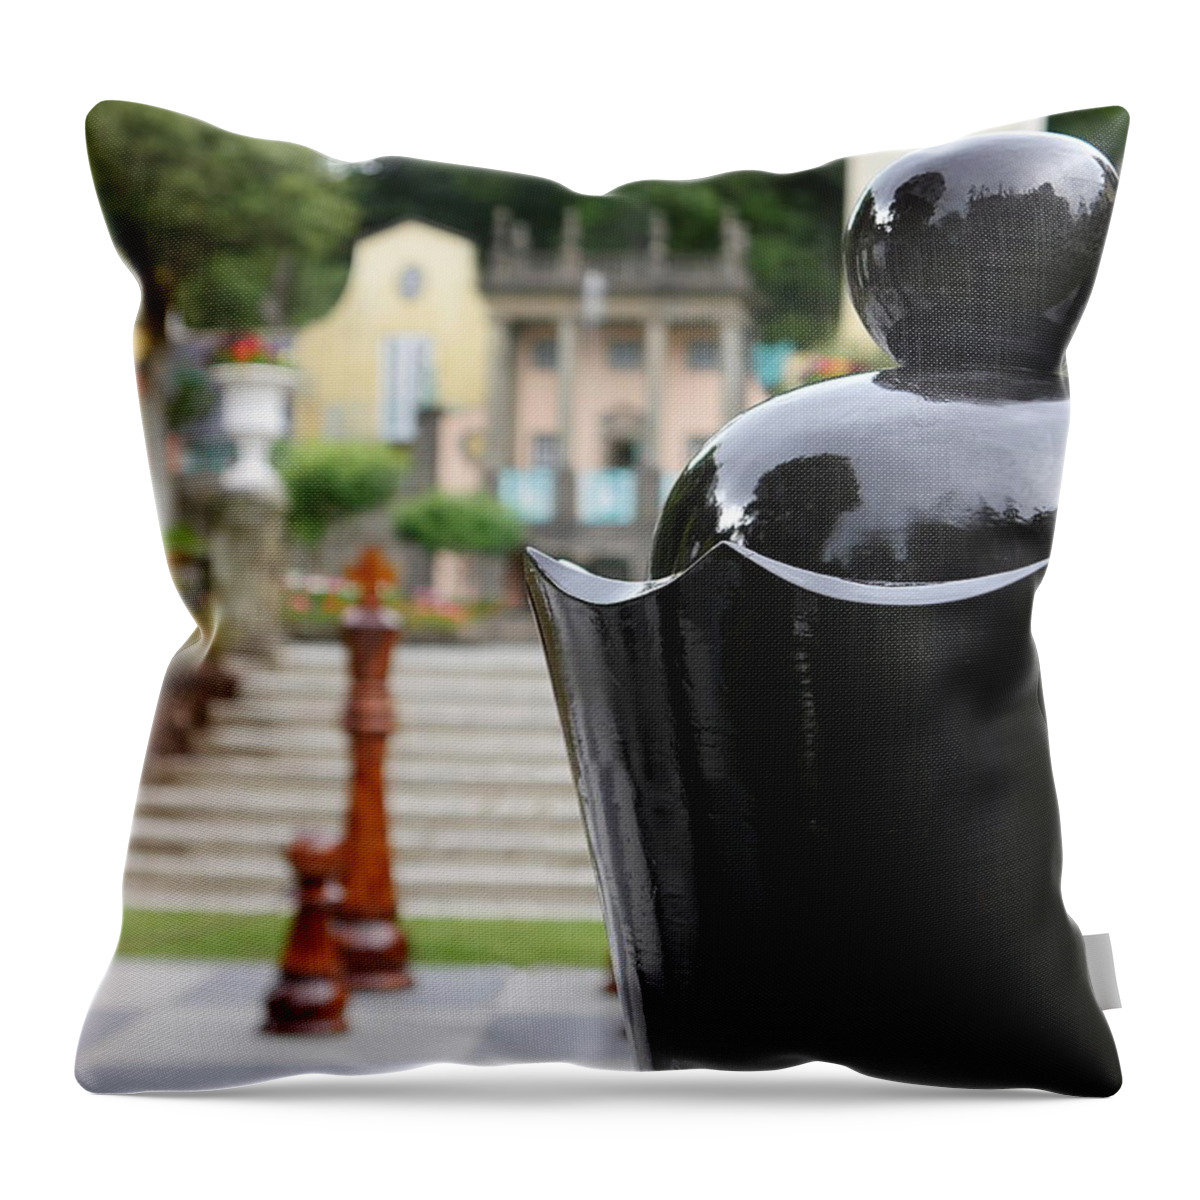 Richard Reeve Throw Pillow featuring the photograph The Queen by Richard Reeve